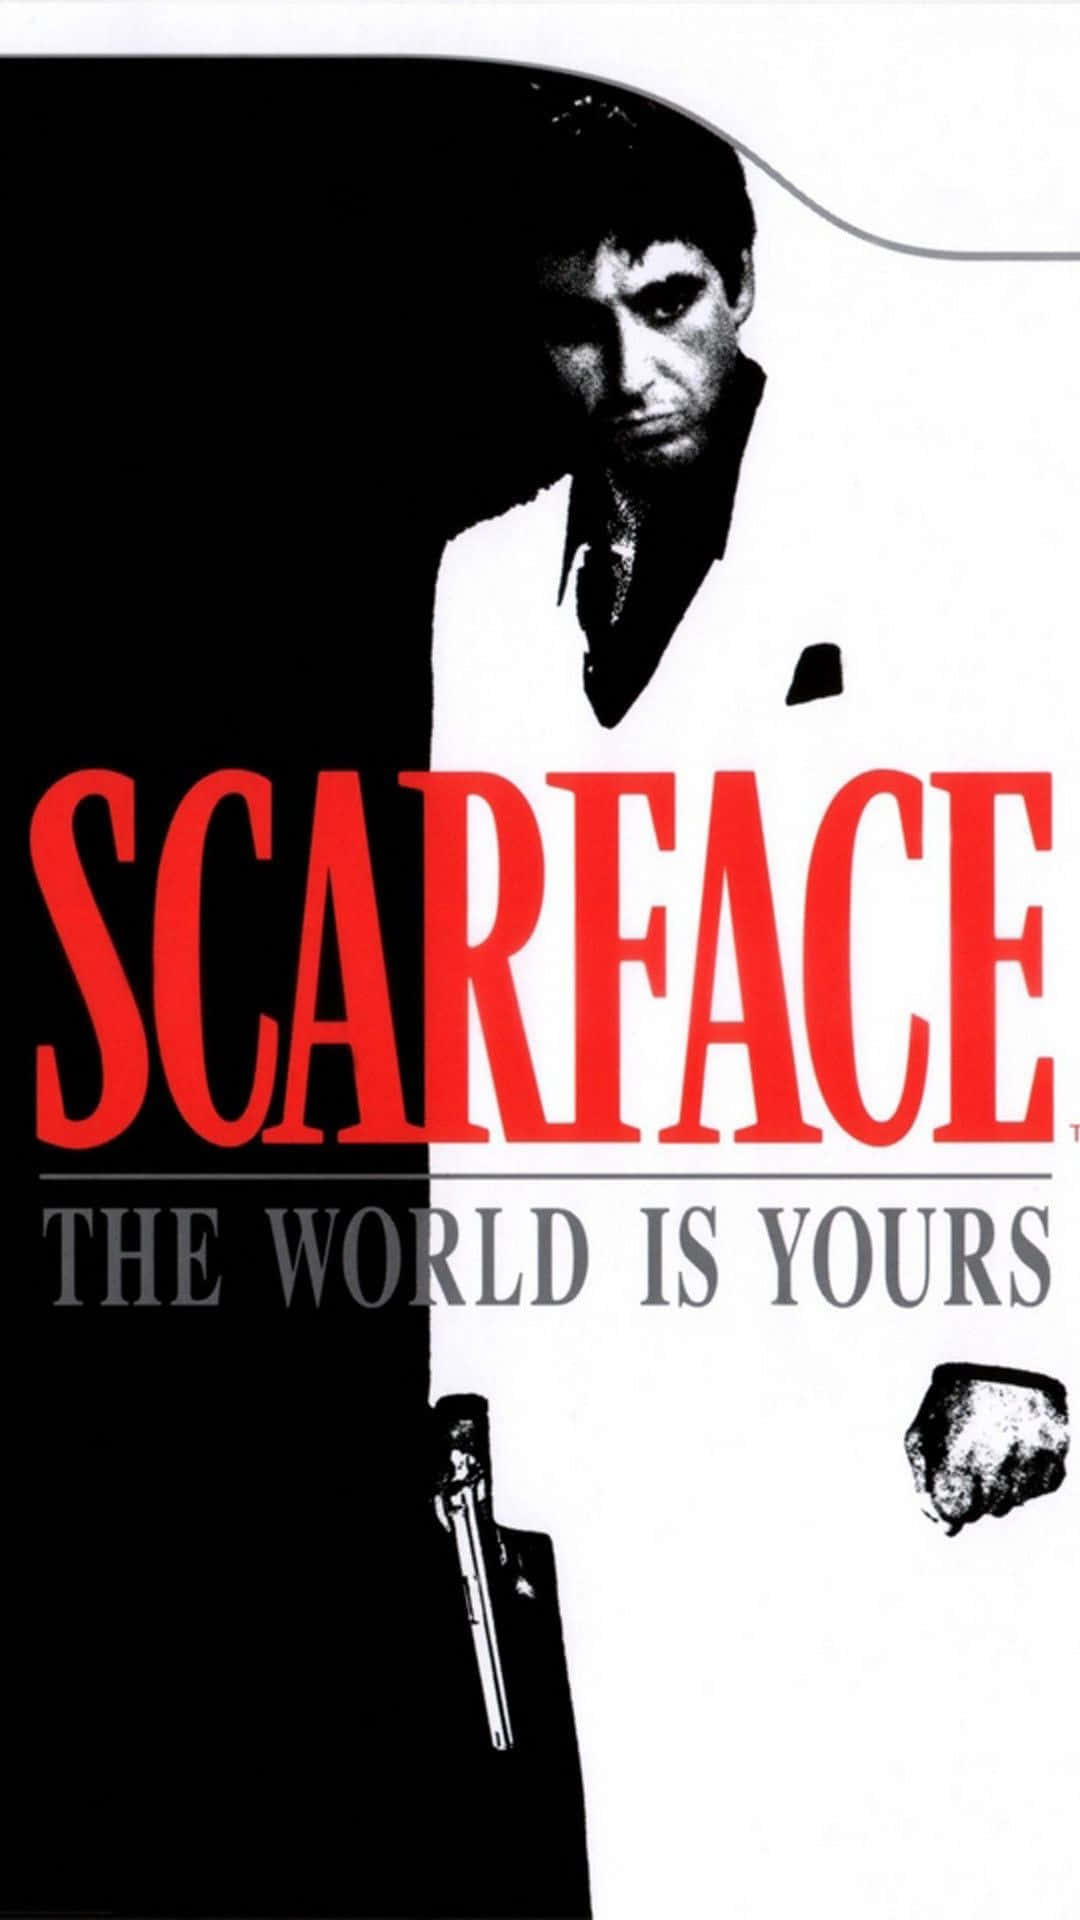 Iconic Scarface Display - Portray Your Phone's Intense Side Wallpaper